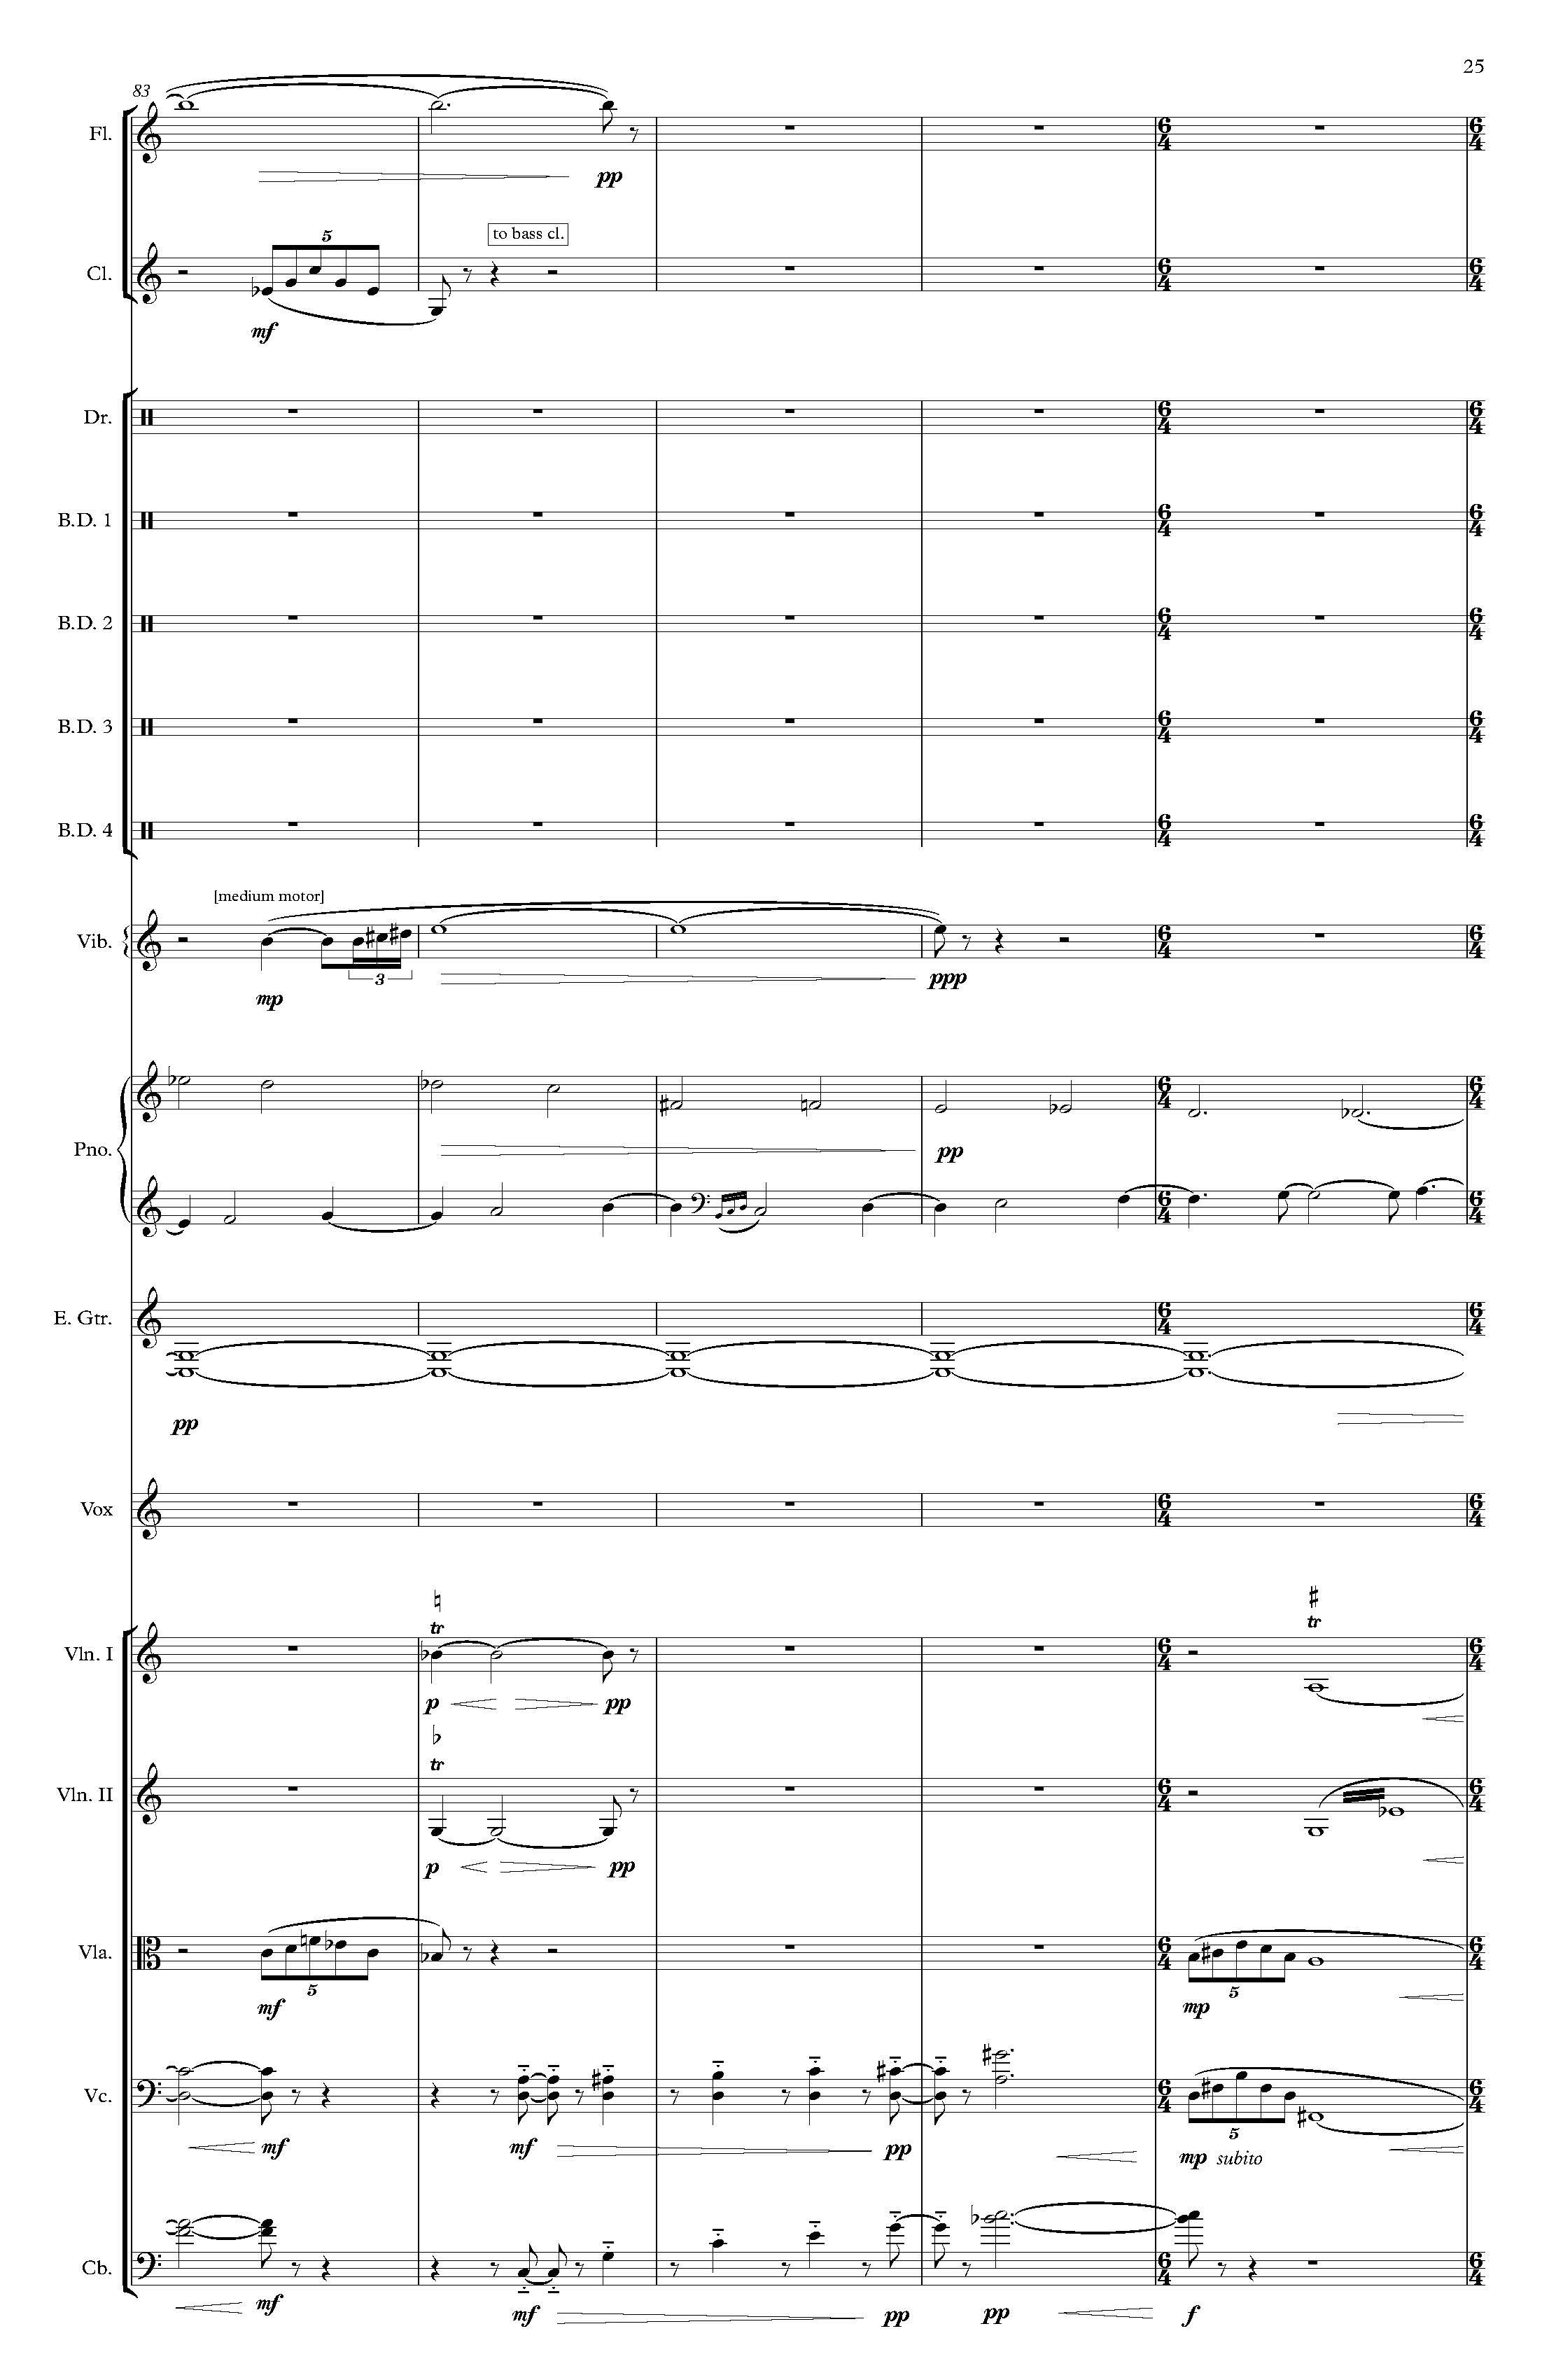 The Rembrandt of Avenue A - Complete Score_Page_31.jpg